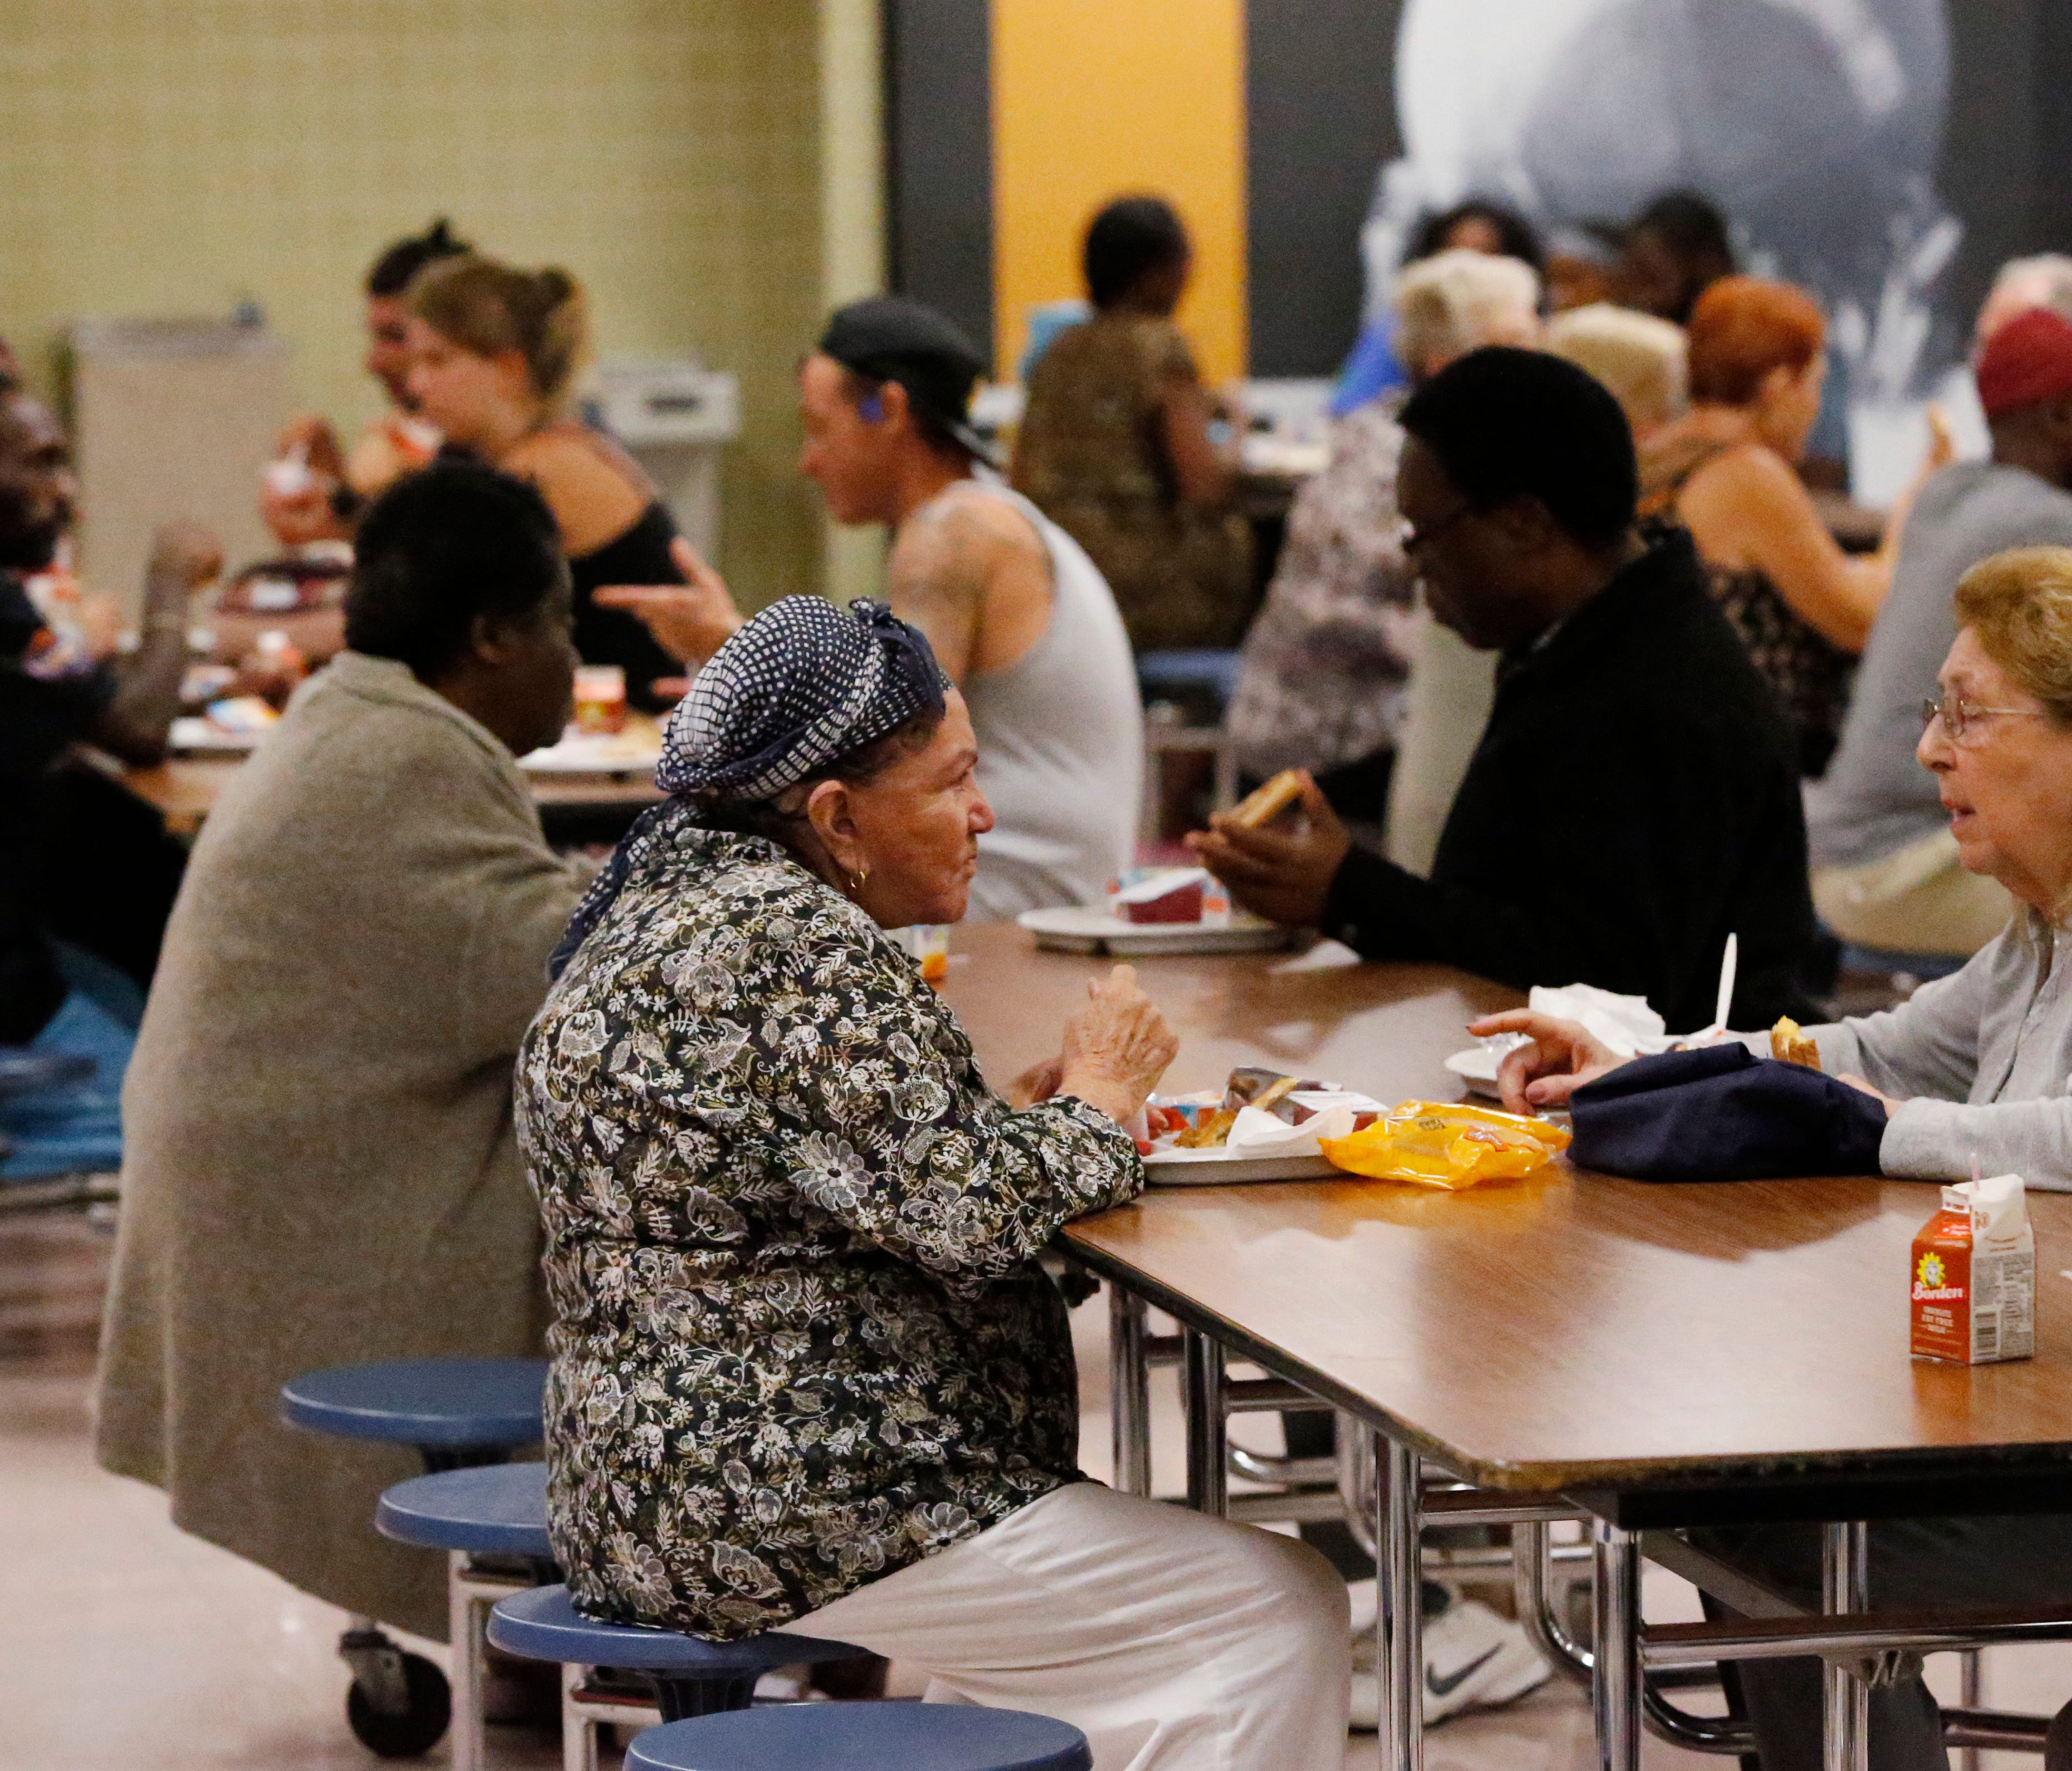 People at a Red Cross shelter set up at North Miami Beach Senior High School eat lunch. Airbnb is trying to find housing for evacuees.